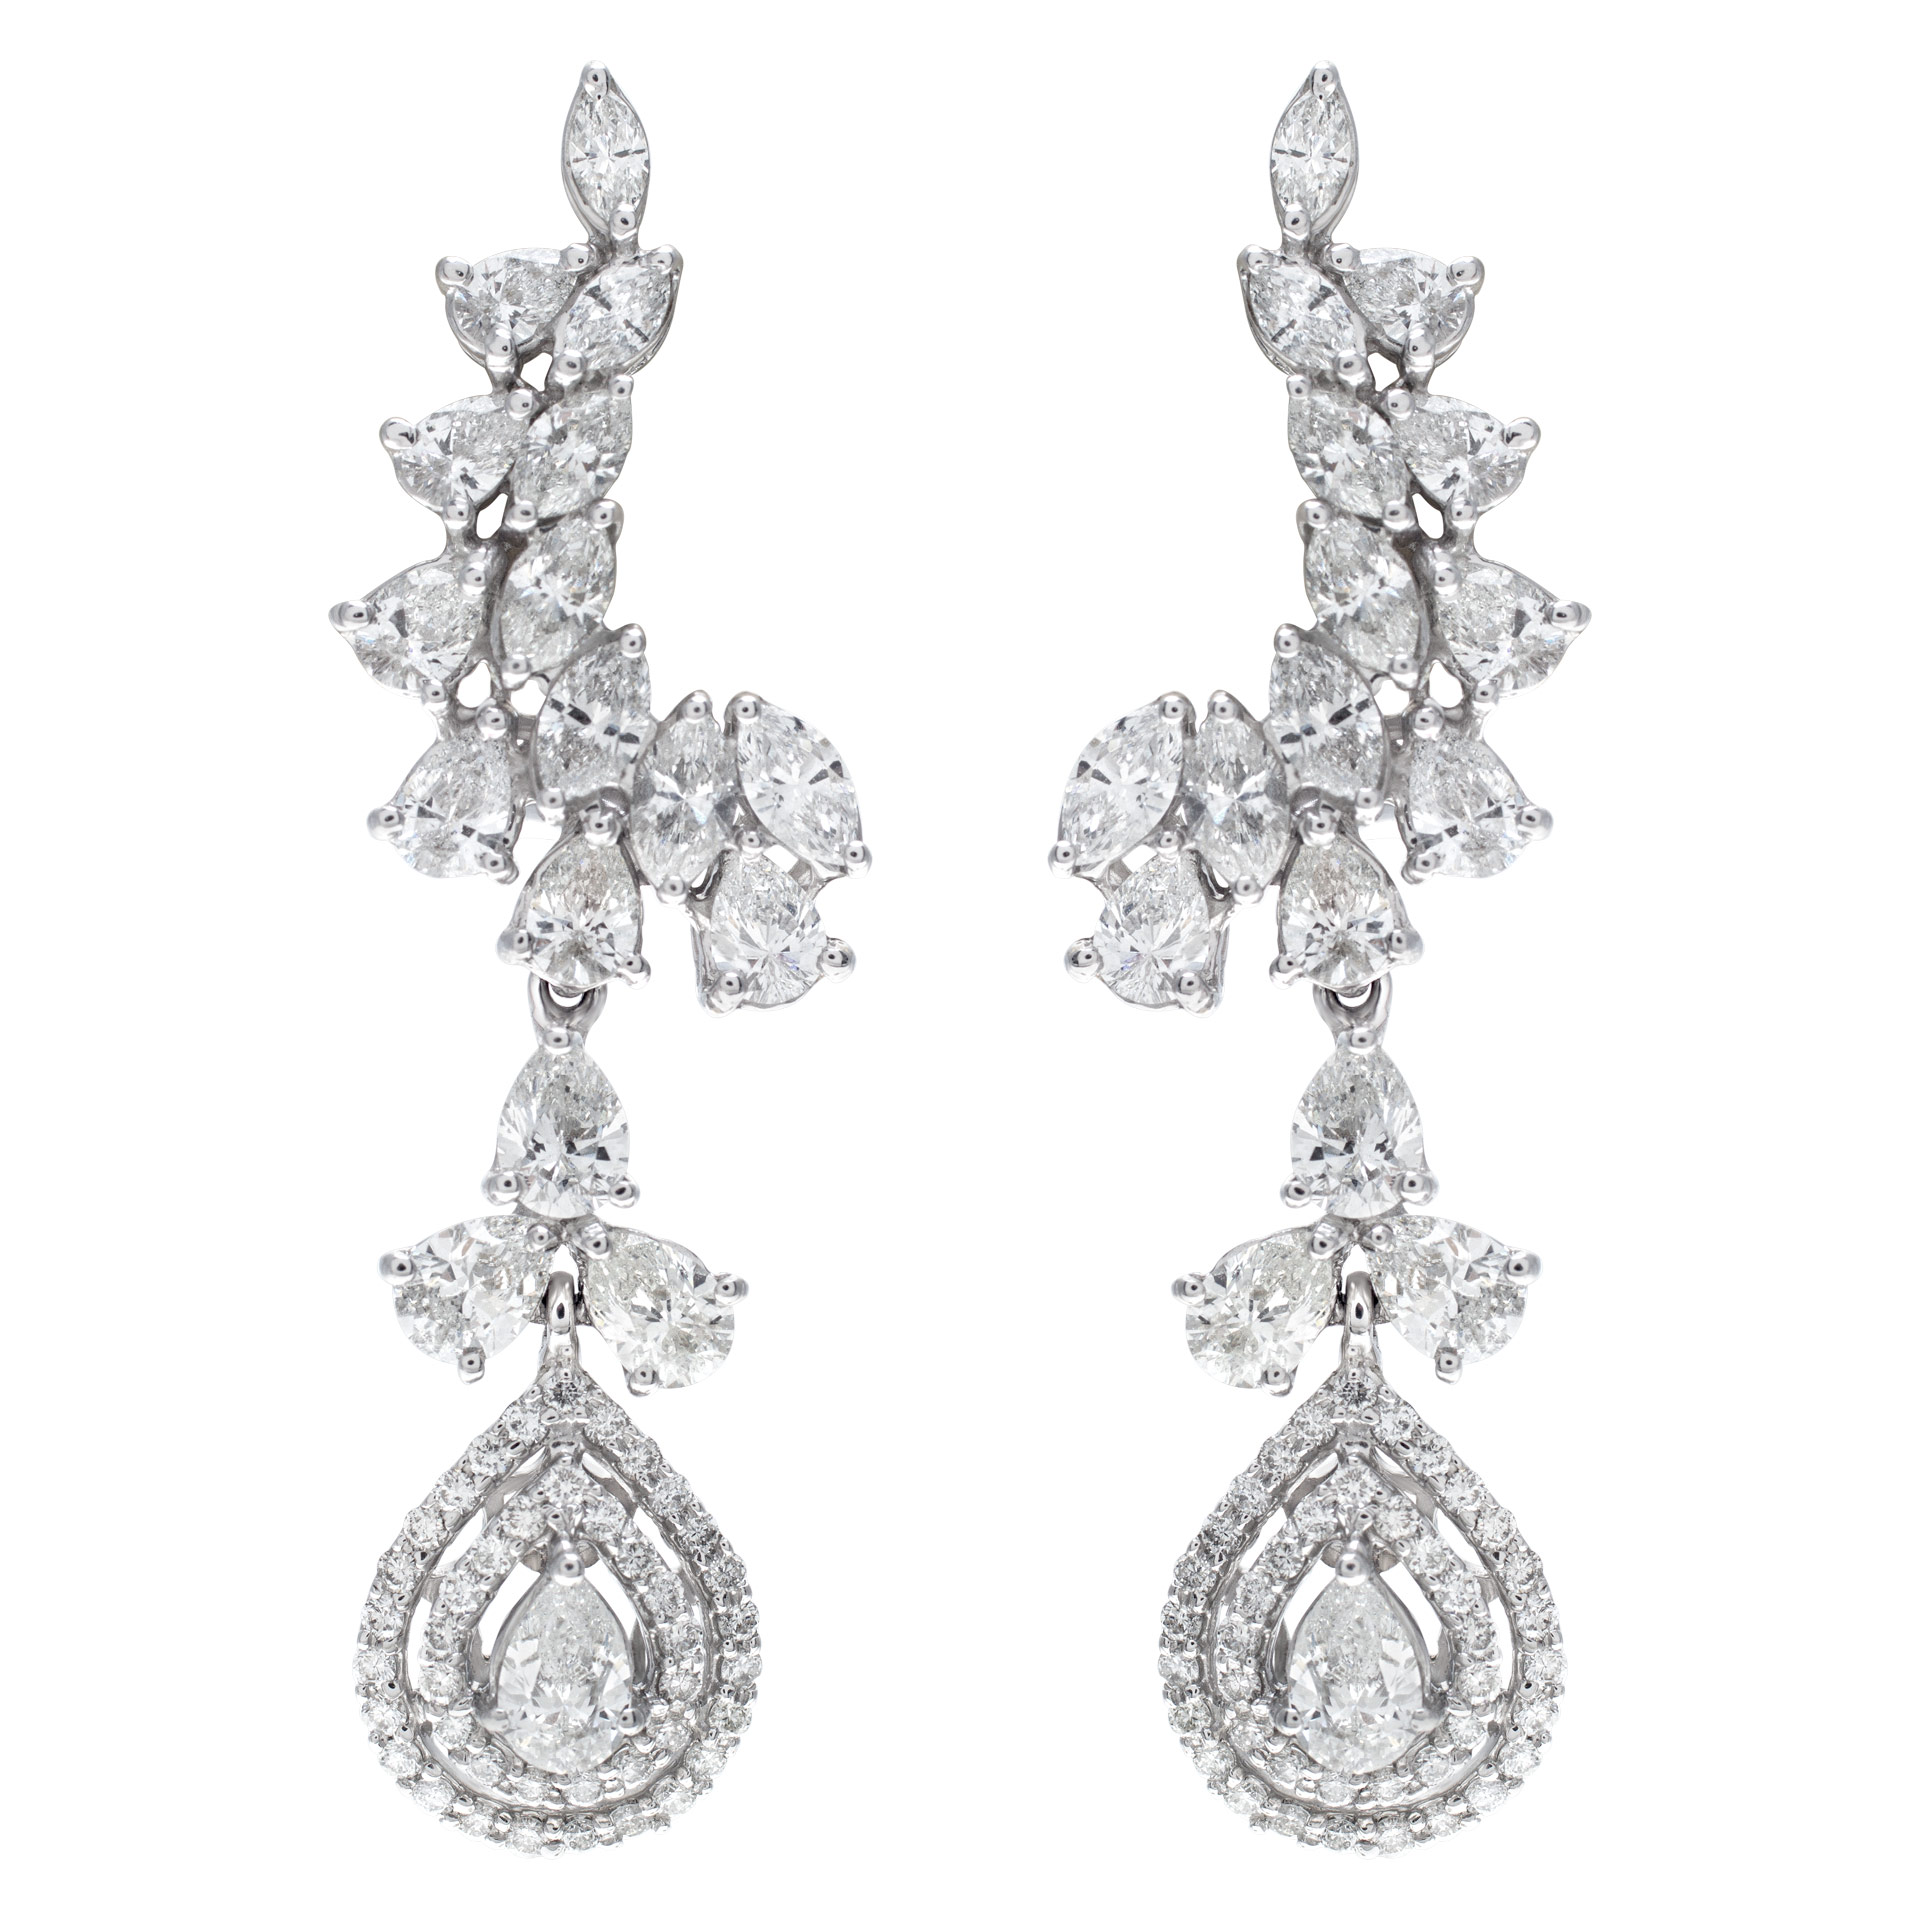 Brilliant marquise, pear, round cut diamond dangling earrings set in 18k white gold. Total diamonds approx. weight: 5.00 carats image 1